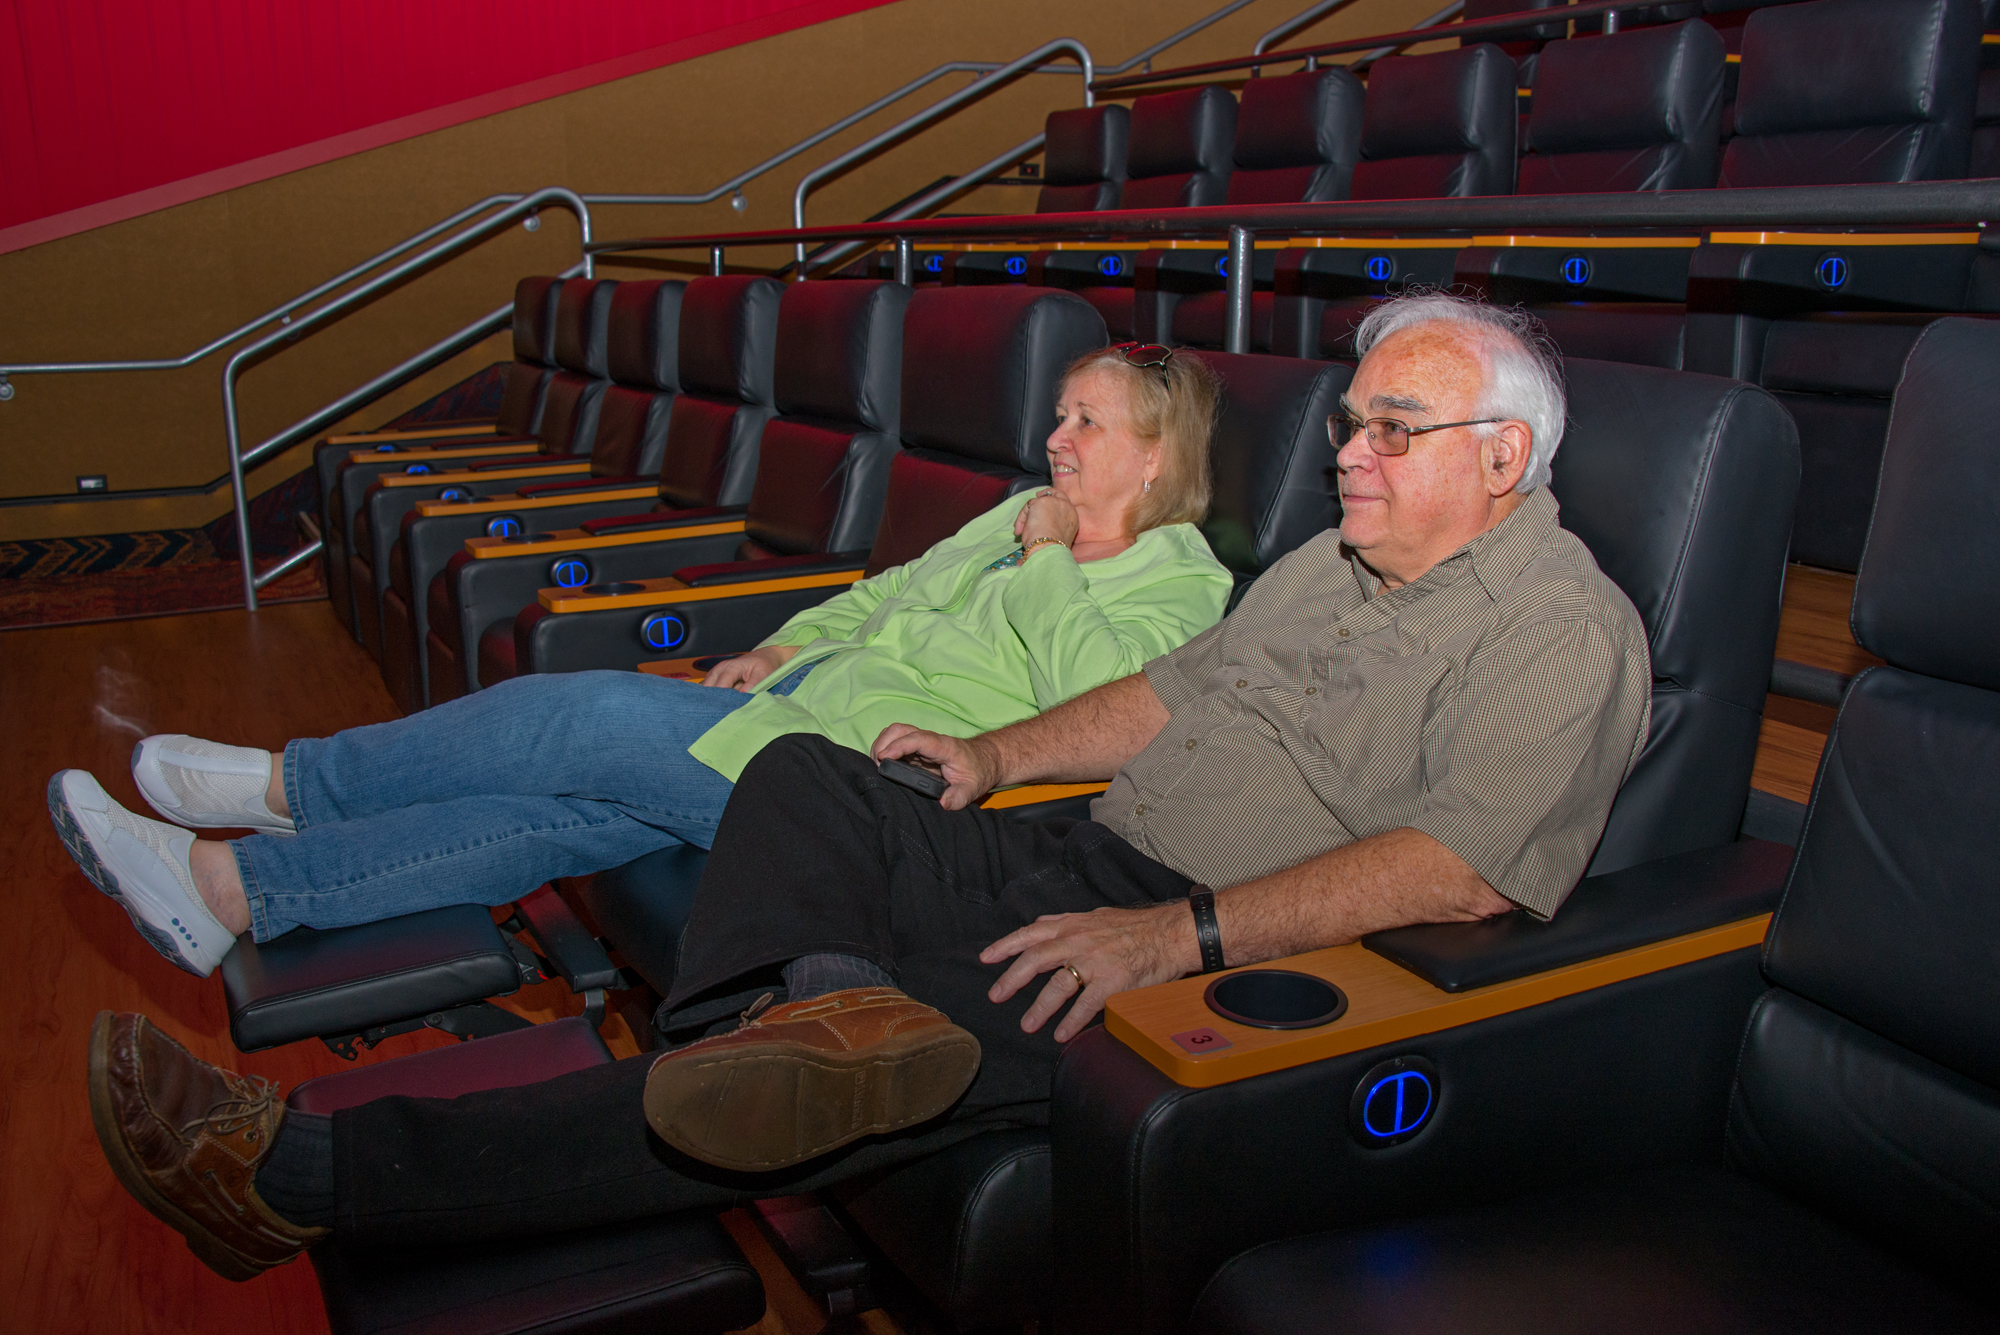 Coral Springs, FL residents Sharon and Ward Bennett enjoying the new leather recliners before a matinee at the Regal Magnolia Theater. - Photos by Sharon Aron Baron